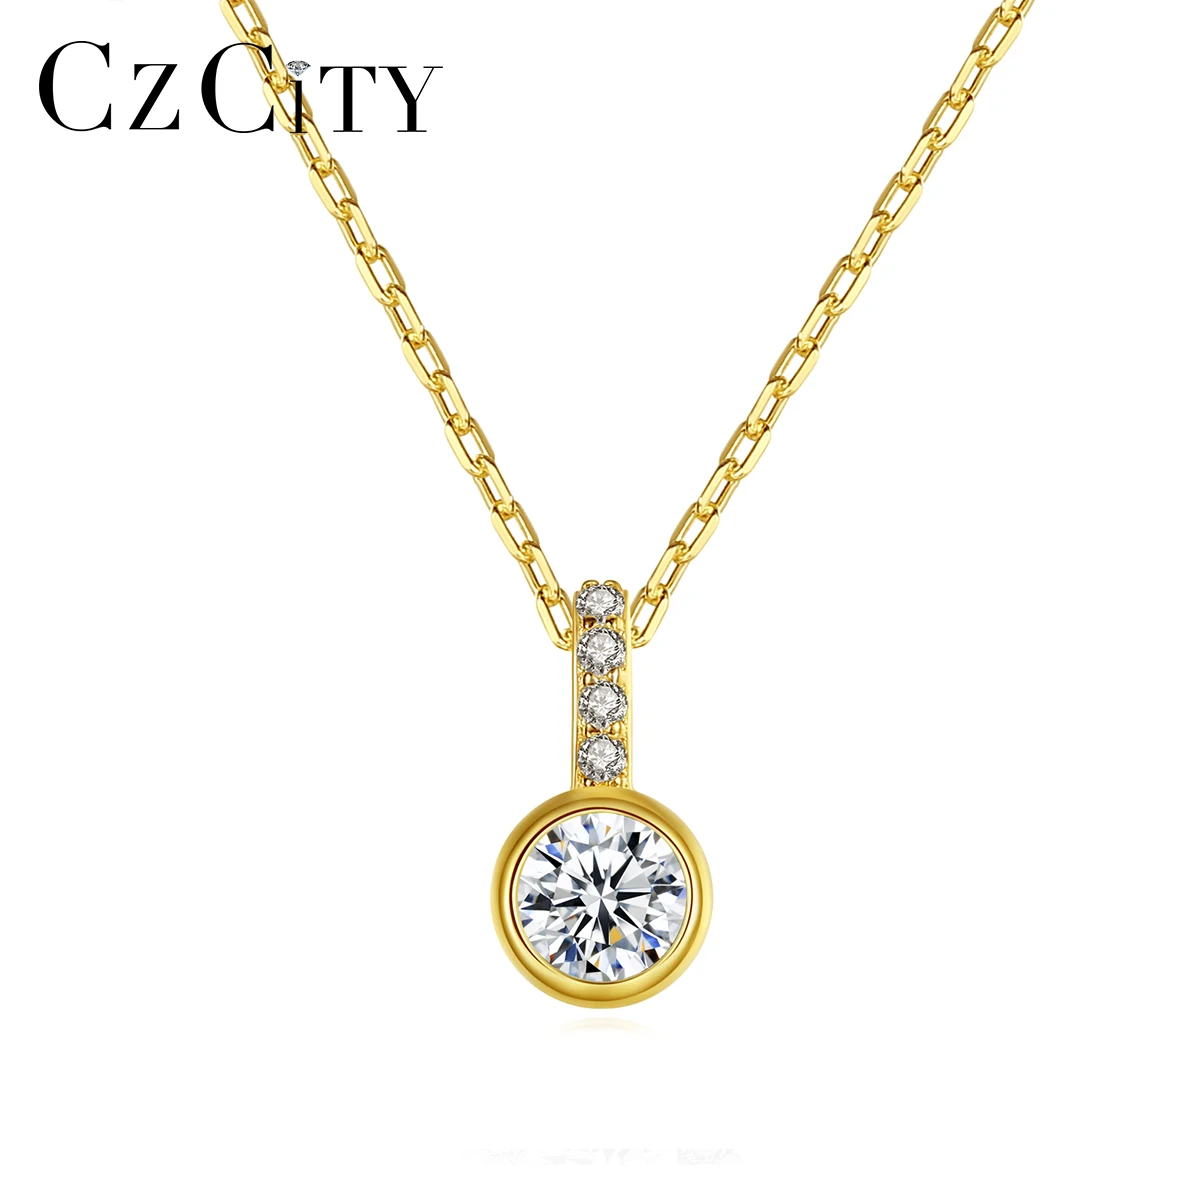 

CZCITY Simple CZ Pendant Necklaces For Women AAA Clear Cubic Zirconia Trendy Girls Wedding 925 Sterling Silver Fine Jewelry Gift